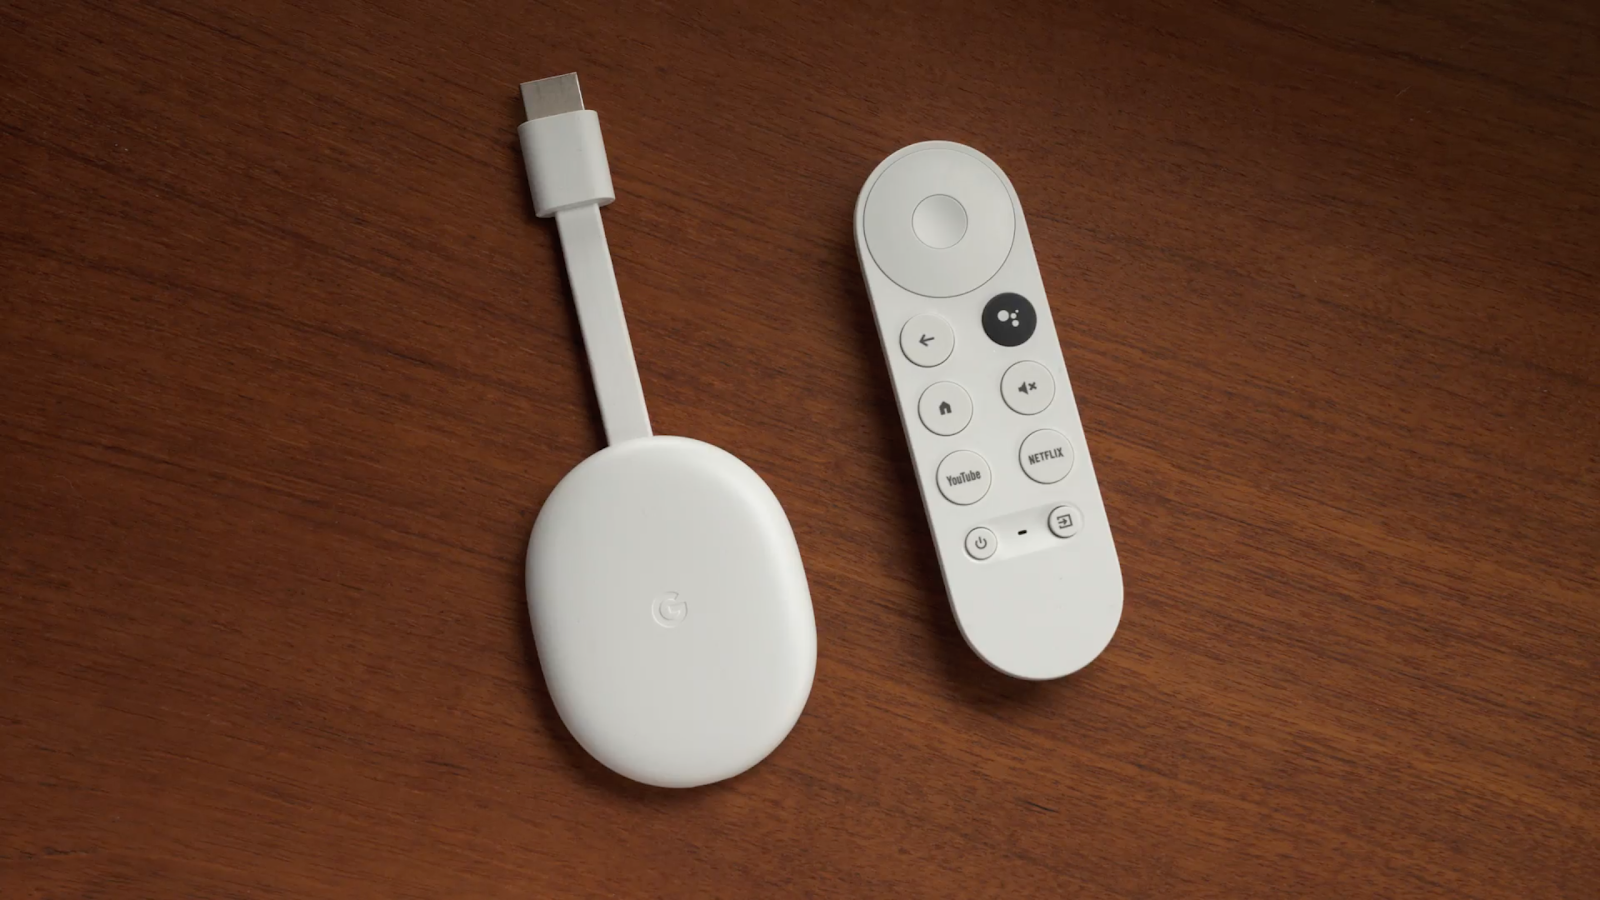 Photo of Google Chromecast product for televisions